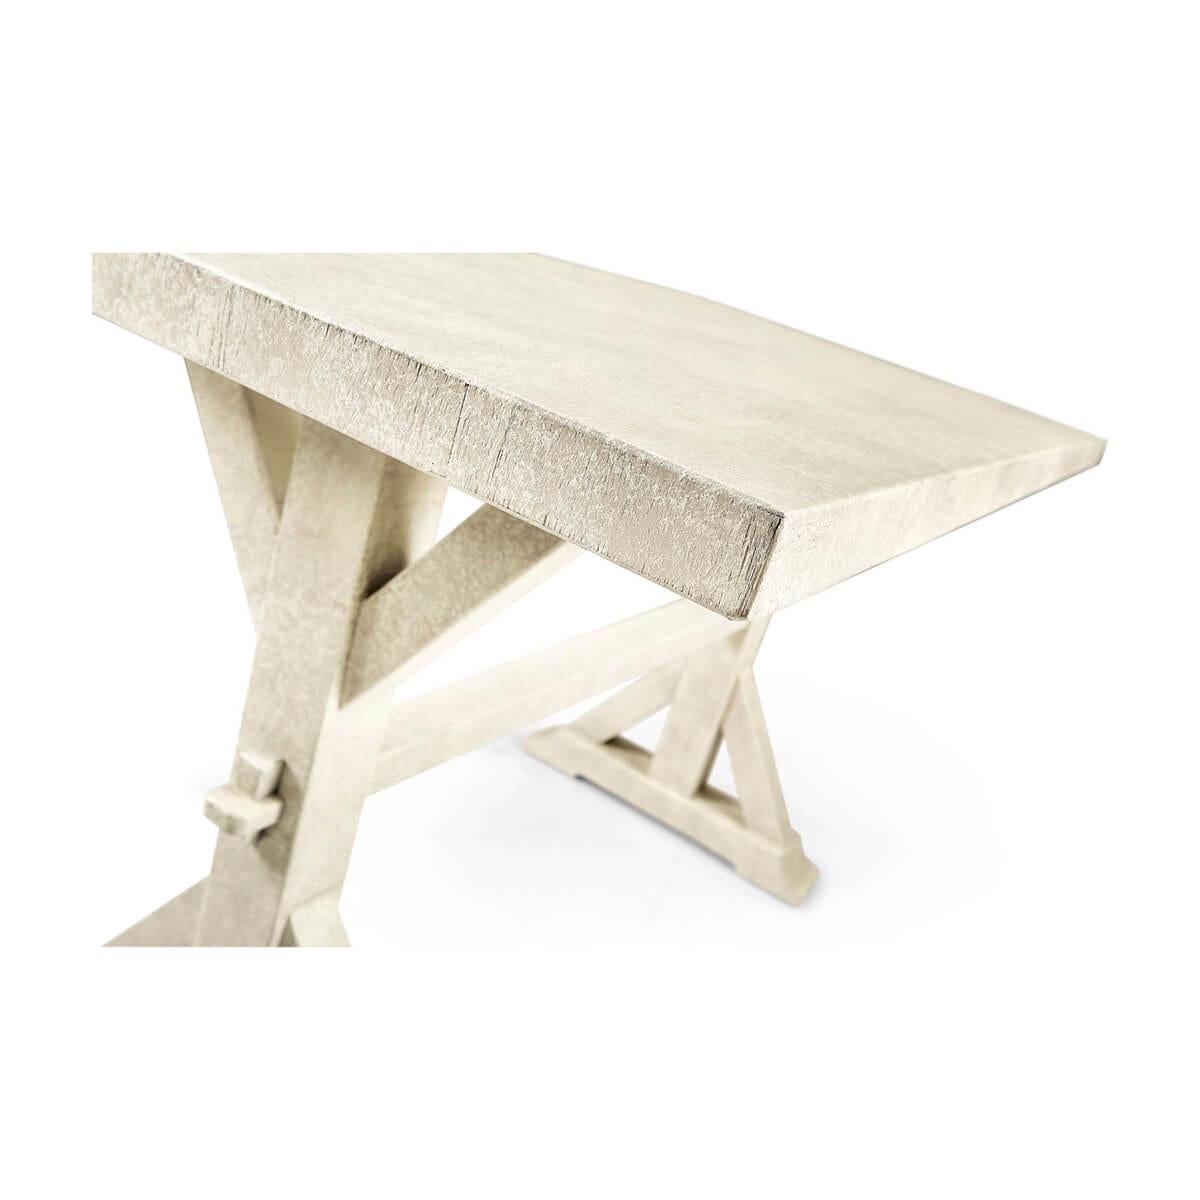 Vietnamese Rustic Country Dining Table, Whitewash For Sale